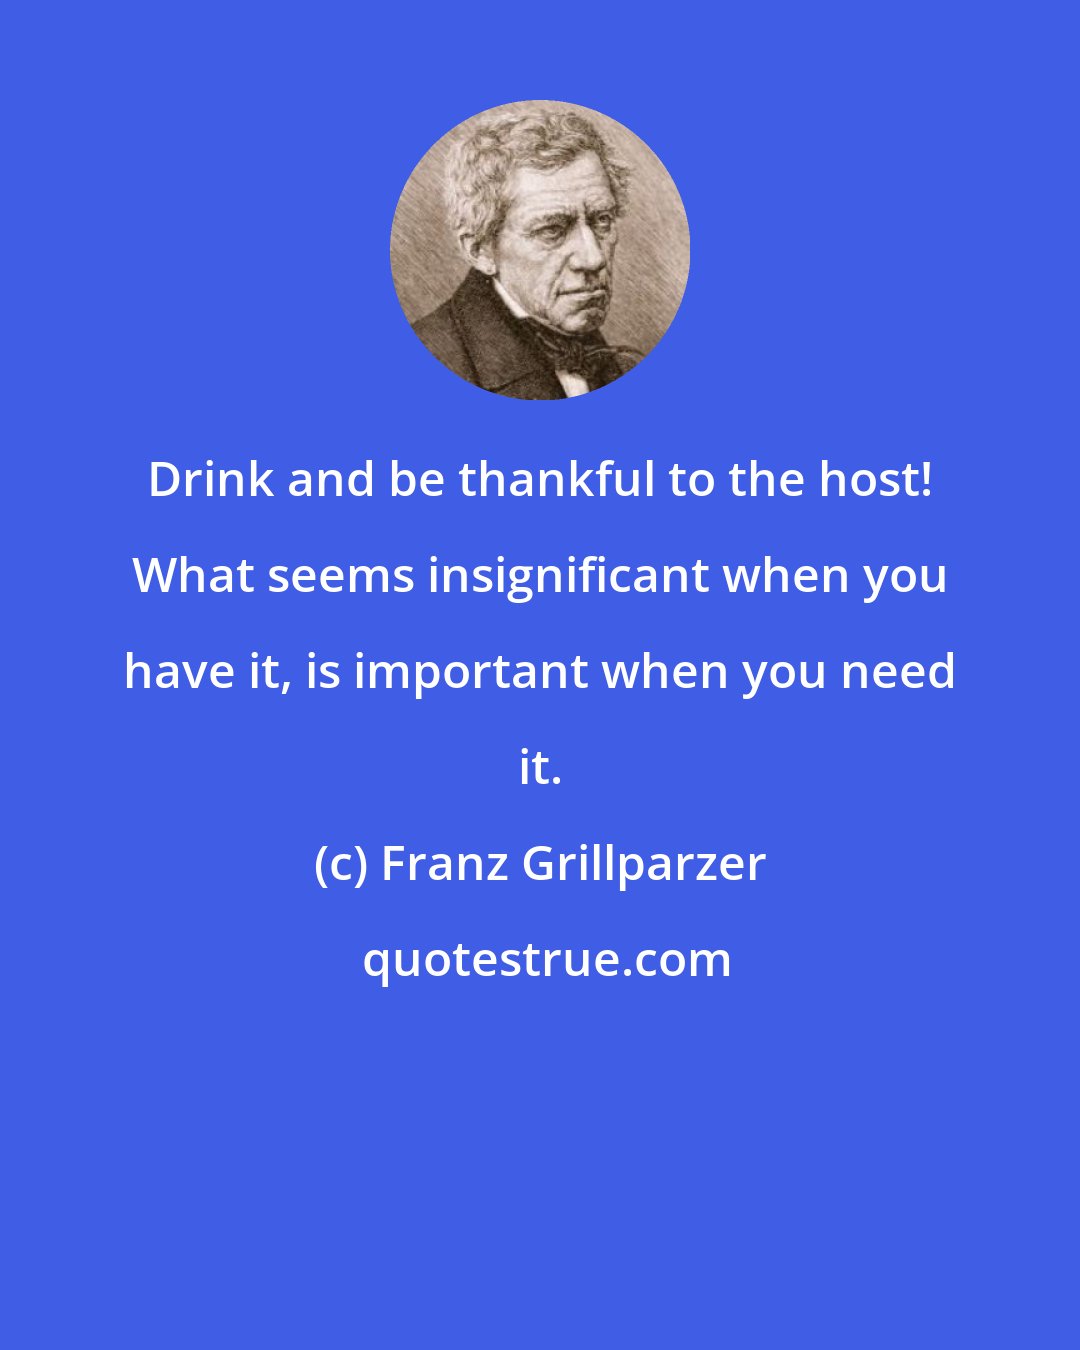 Franz Grillparzer: Drink and be thankful to the host! What seems insignificant when you have it, is important when you need it.